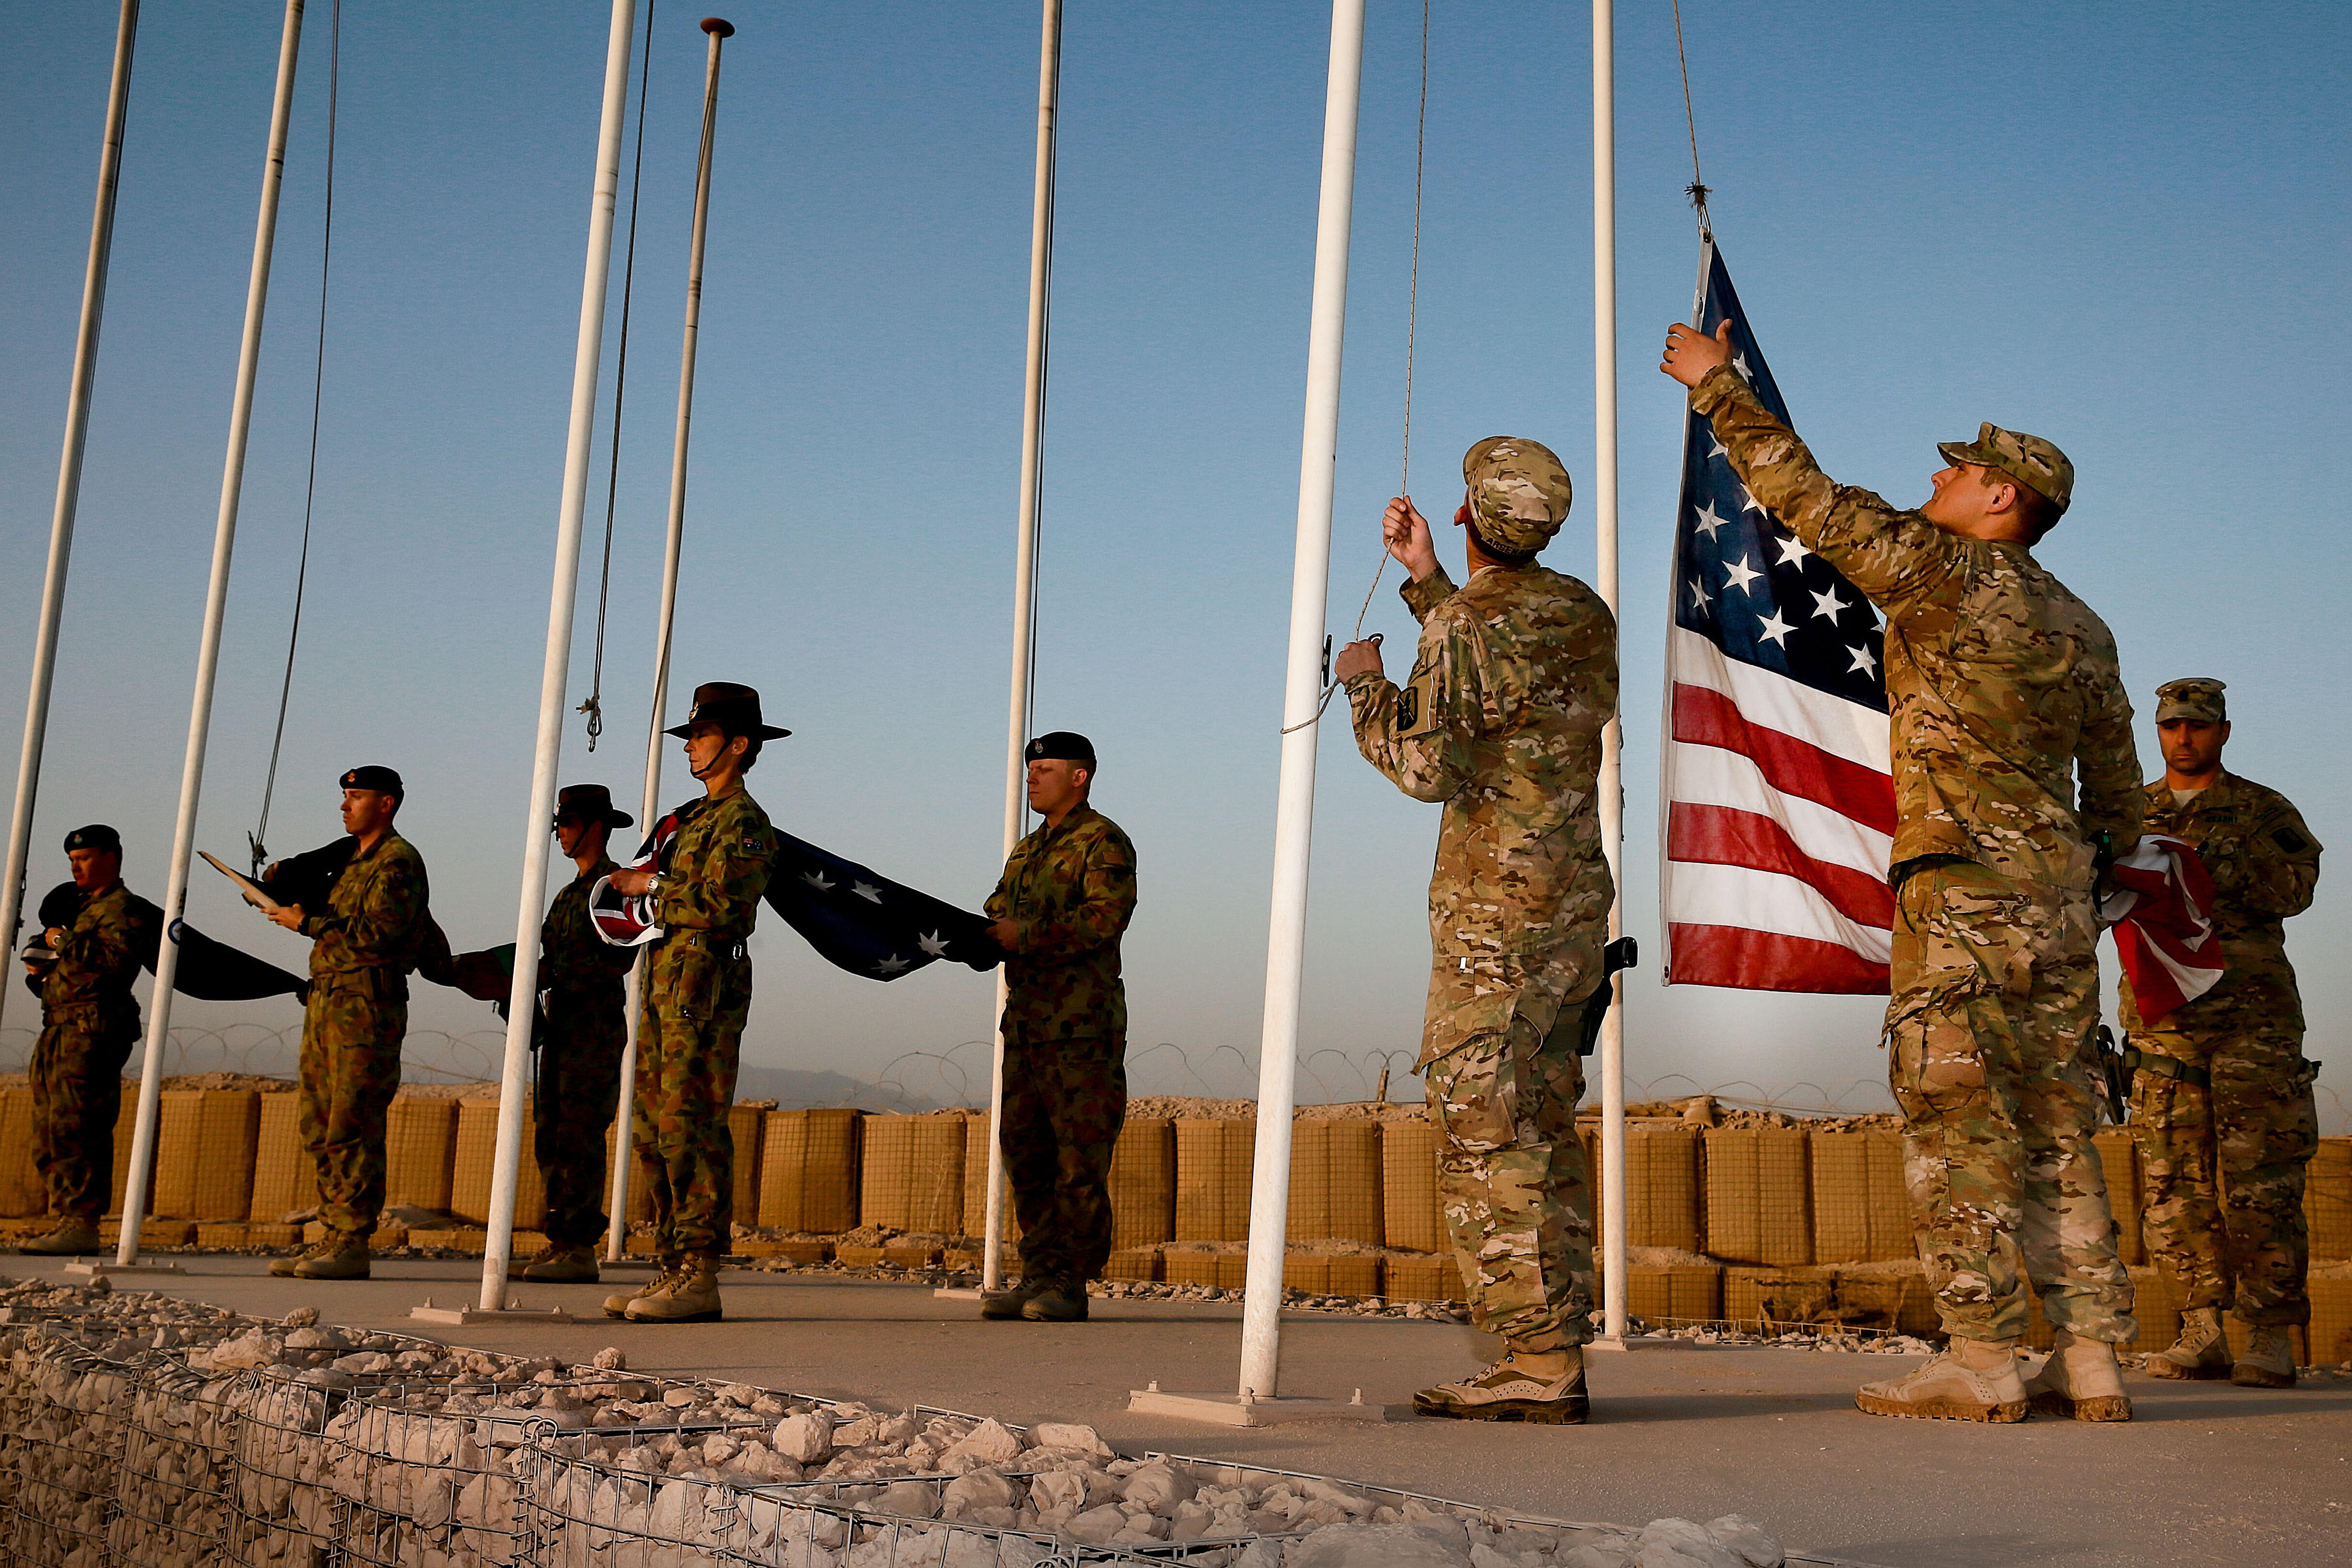 American military lower the American flag at a base in Afghanistan.